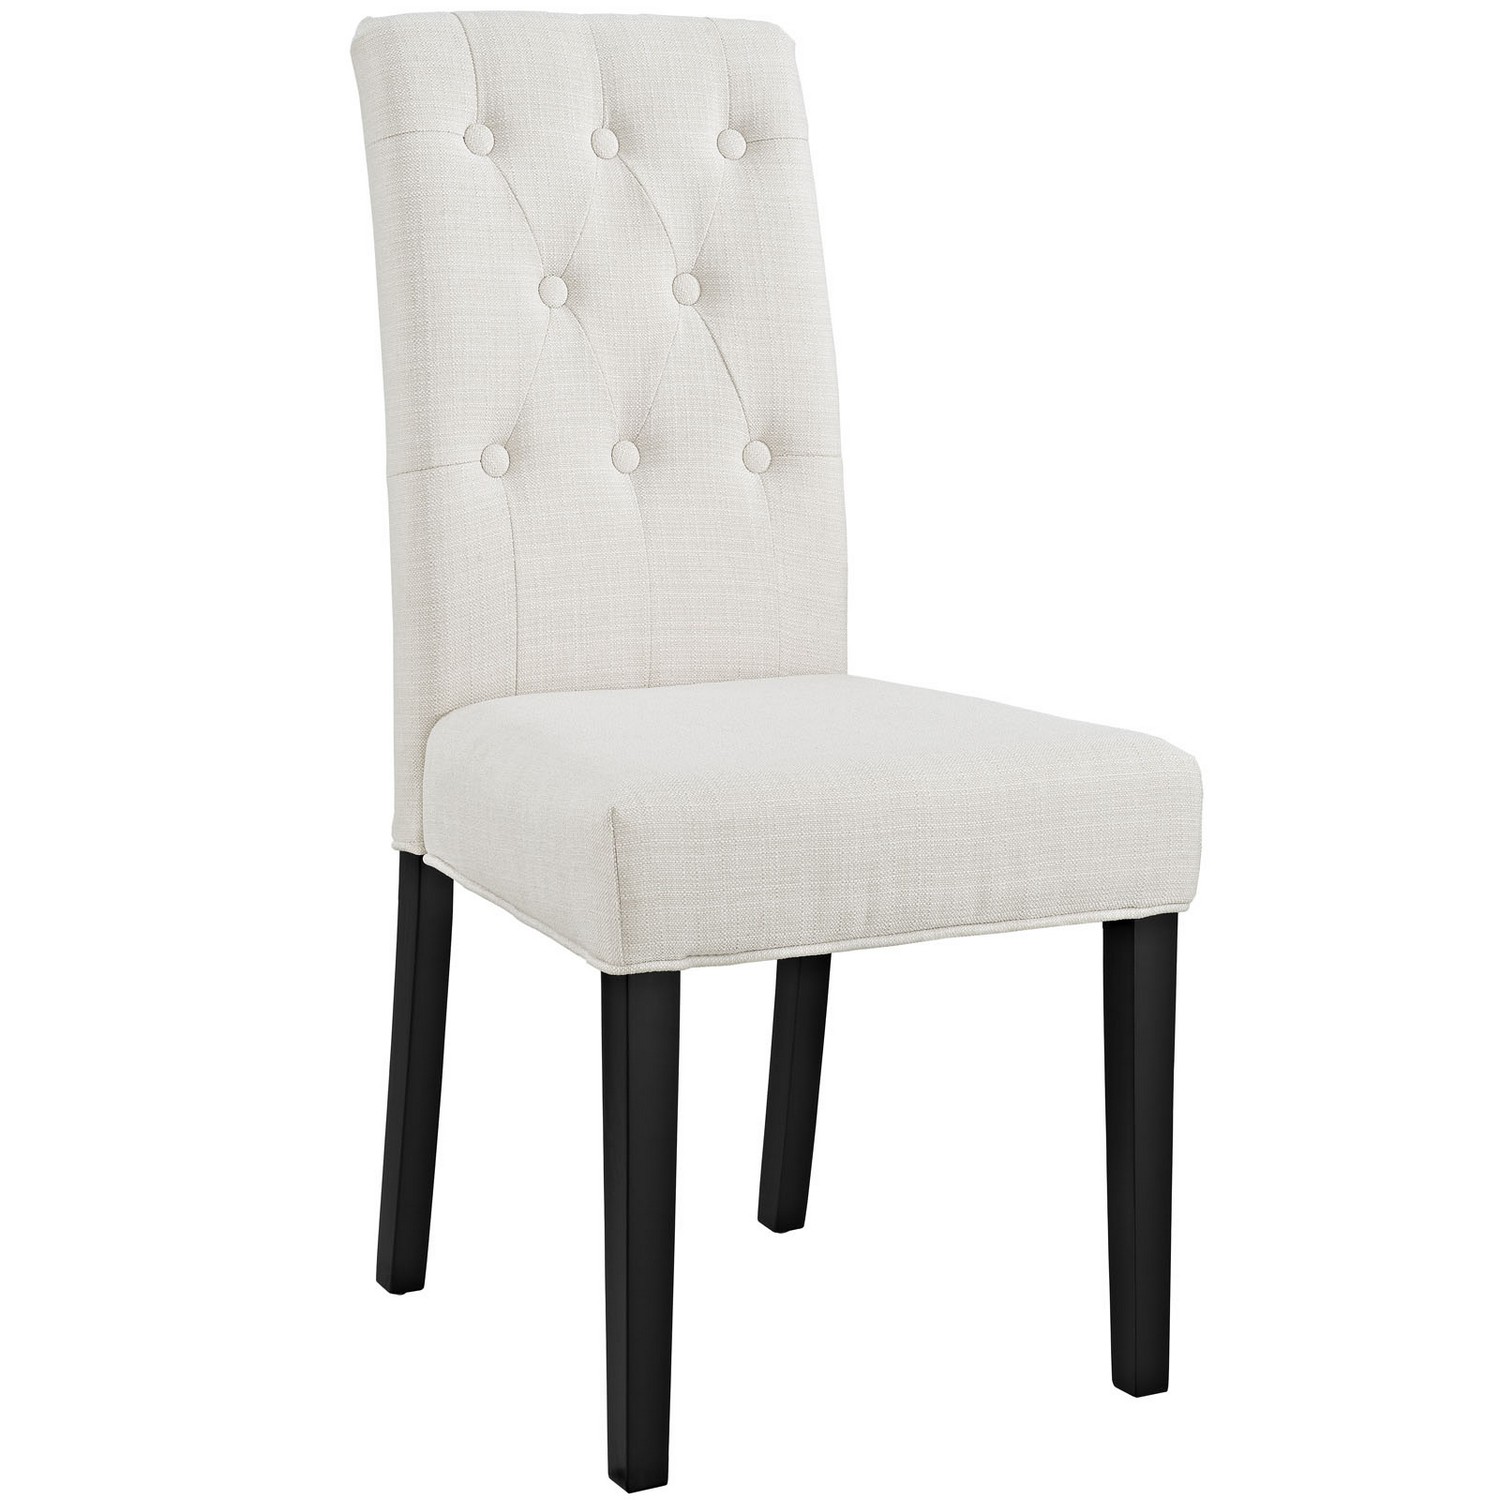 Modway Confer Dining Fabric Side Chair - Beige